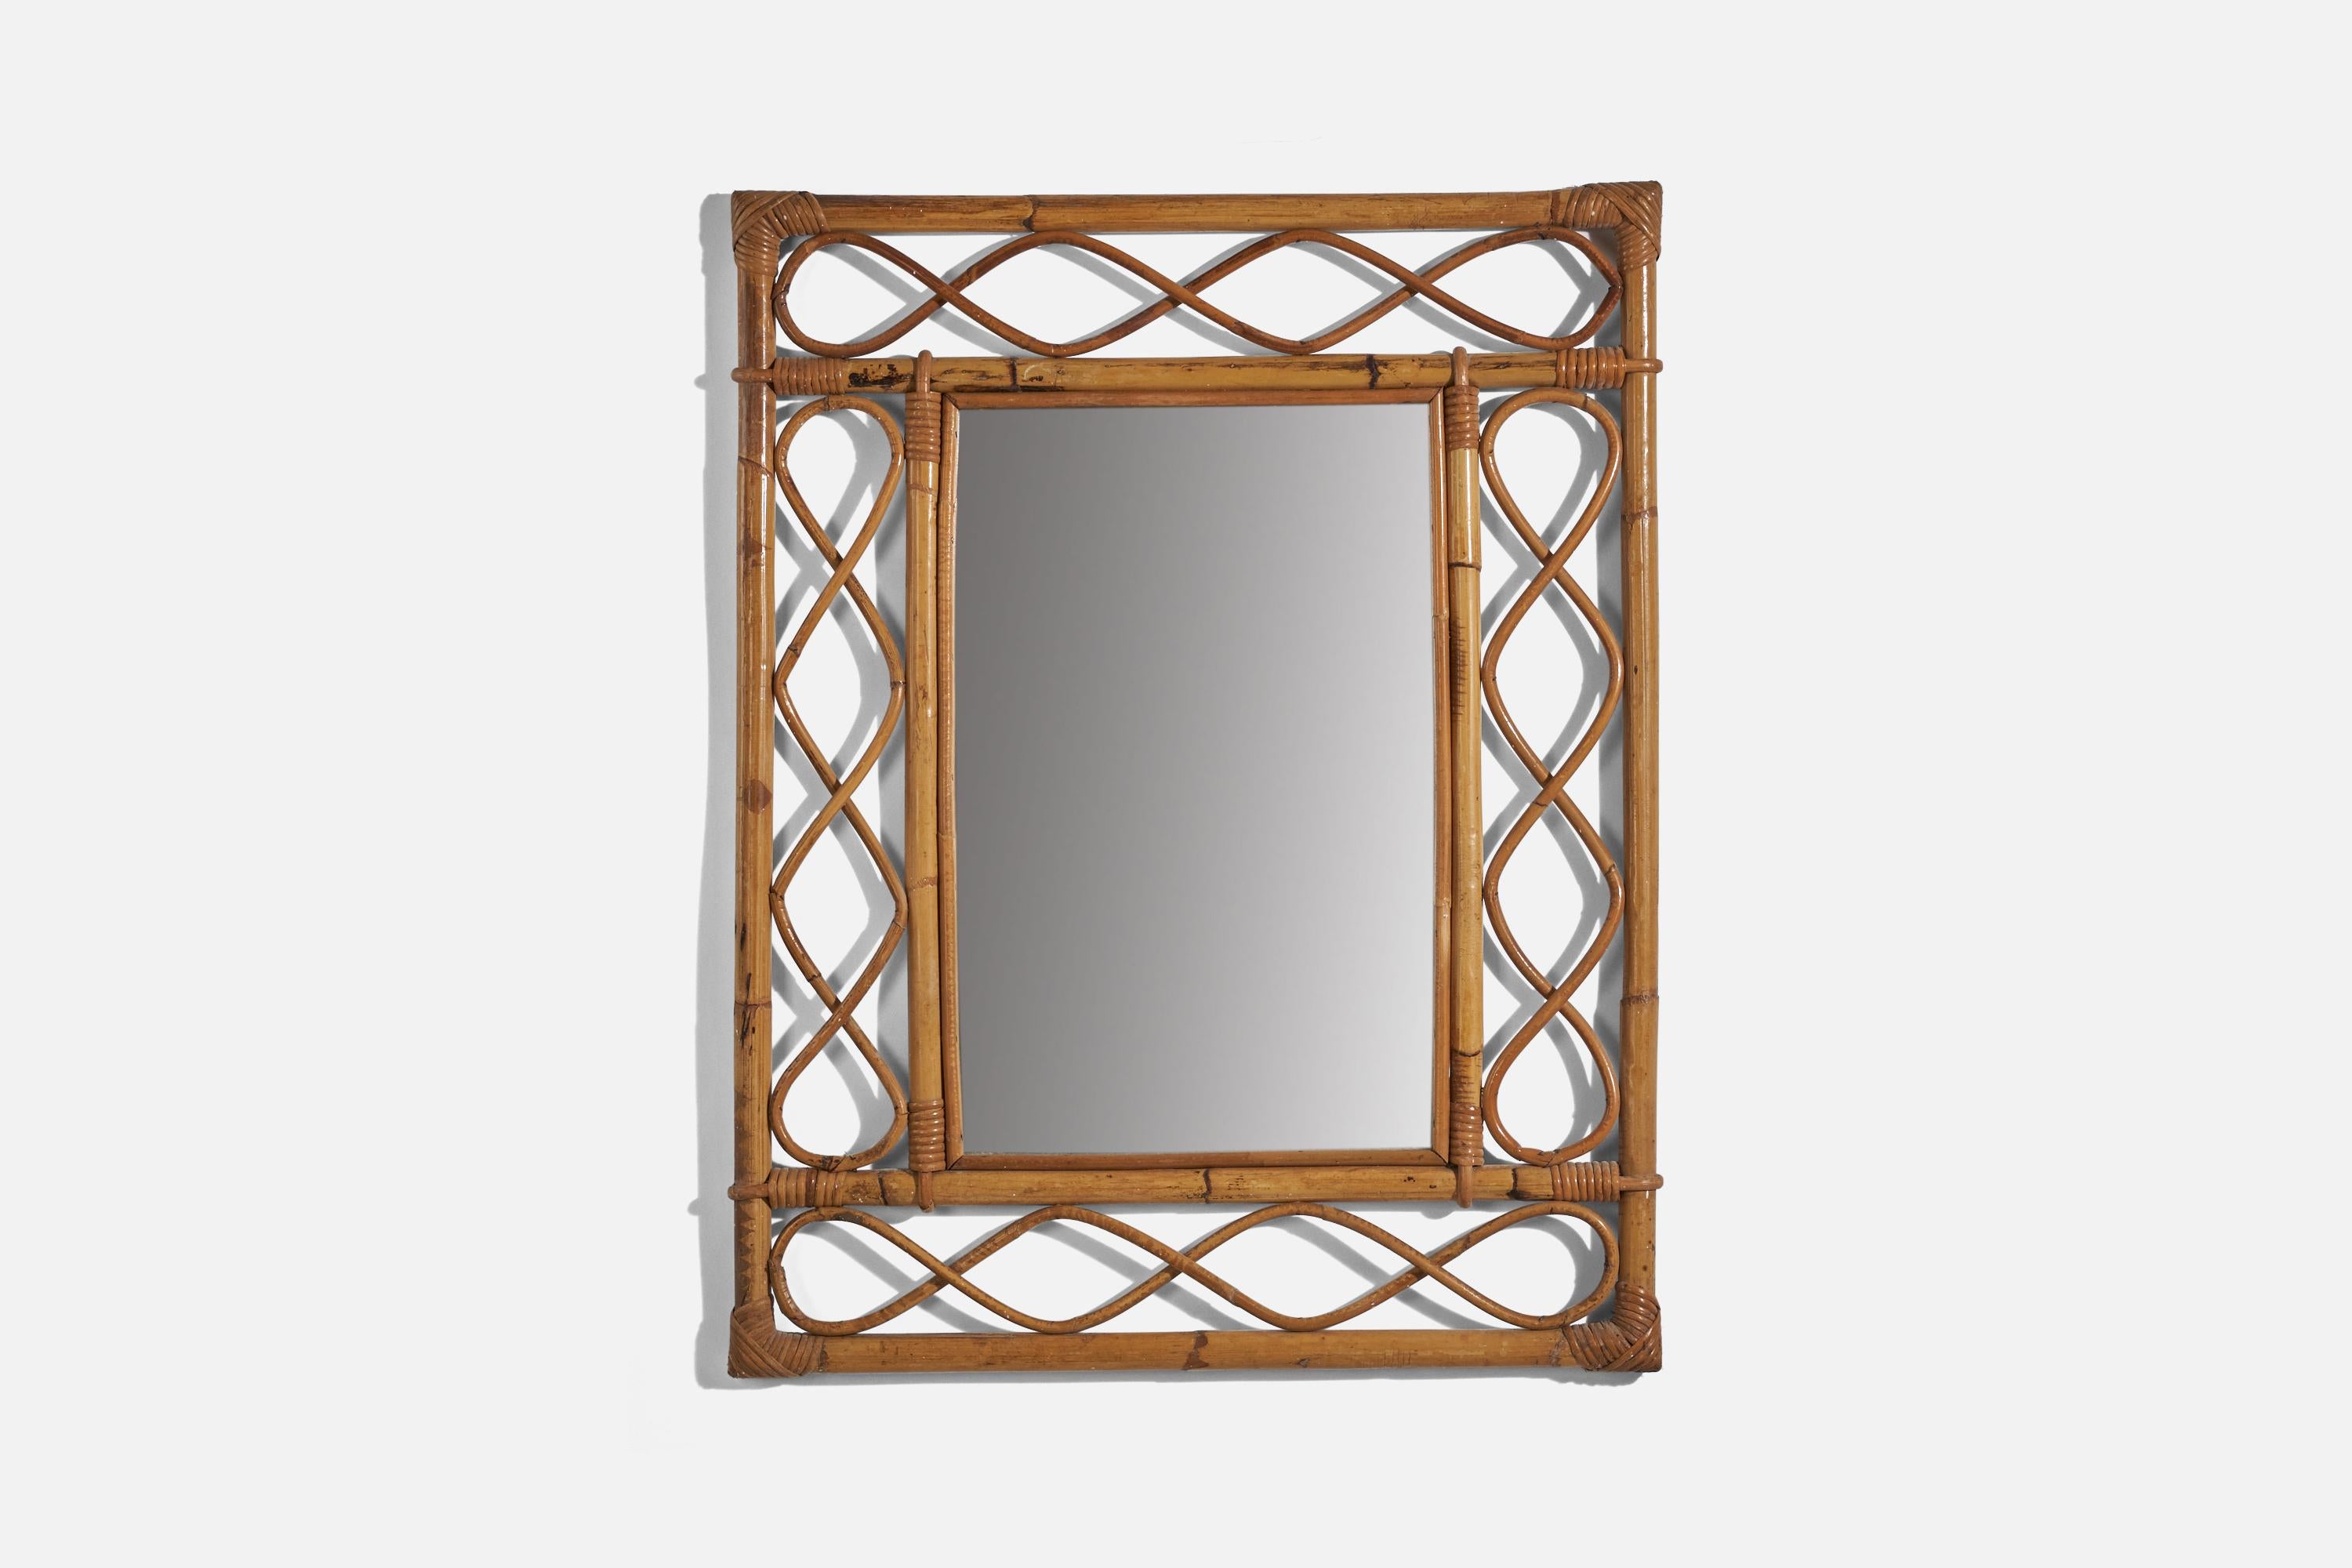 A rattan and bamboo wall mirror designed and produced in Italy, 1950s. 